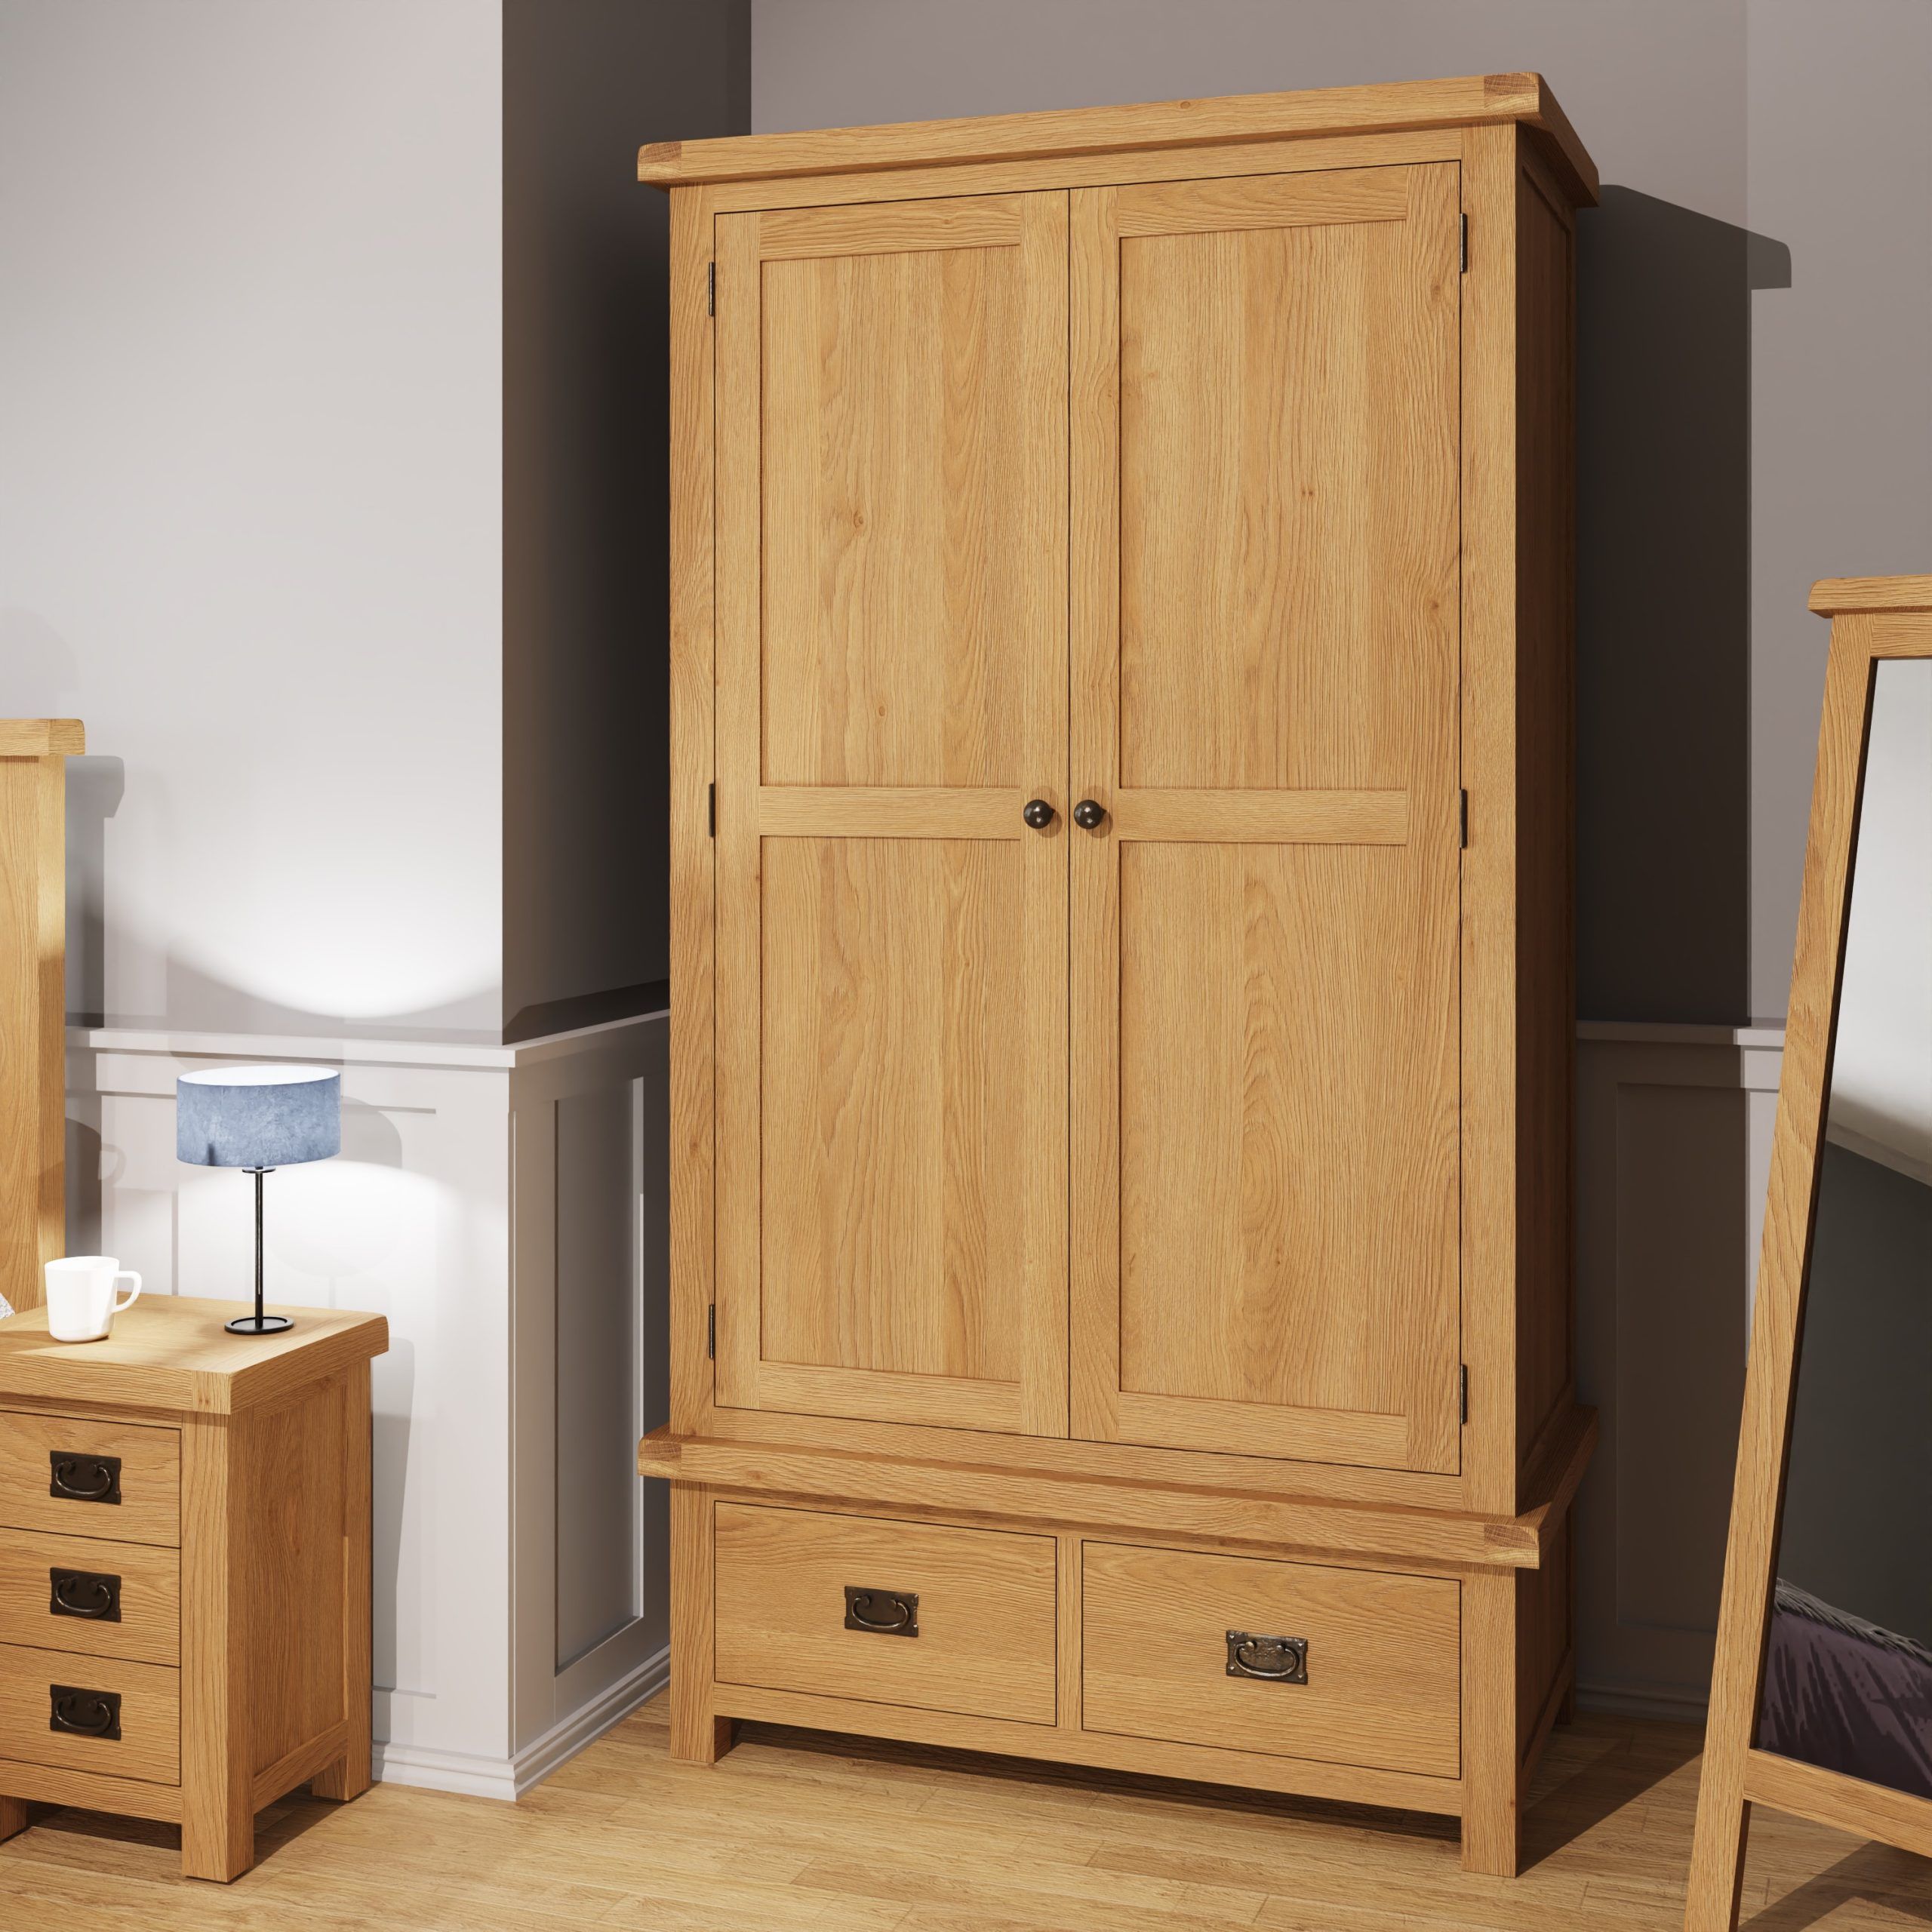 Carthorpe Oak 2 Door 2 Drawer Wardrobe – Only Oak Furniture For Oak Wardrobes With Drawers And Shelves (View 7 of 15)